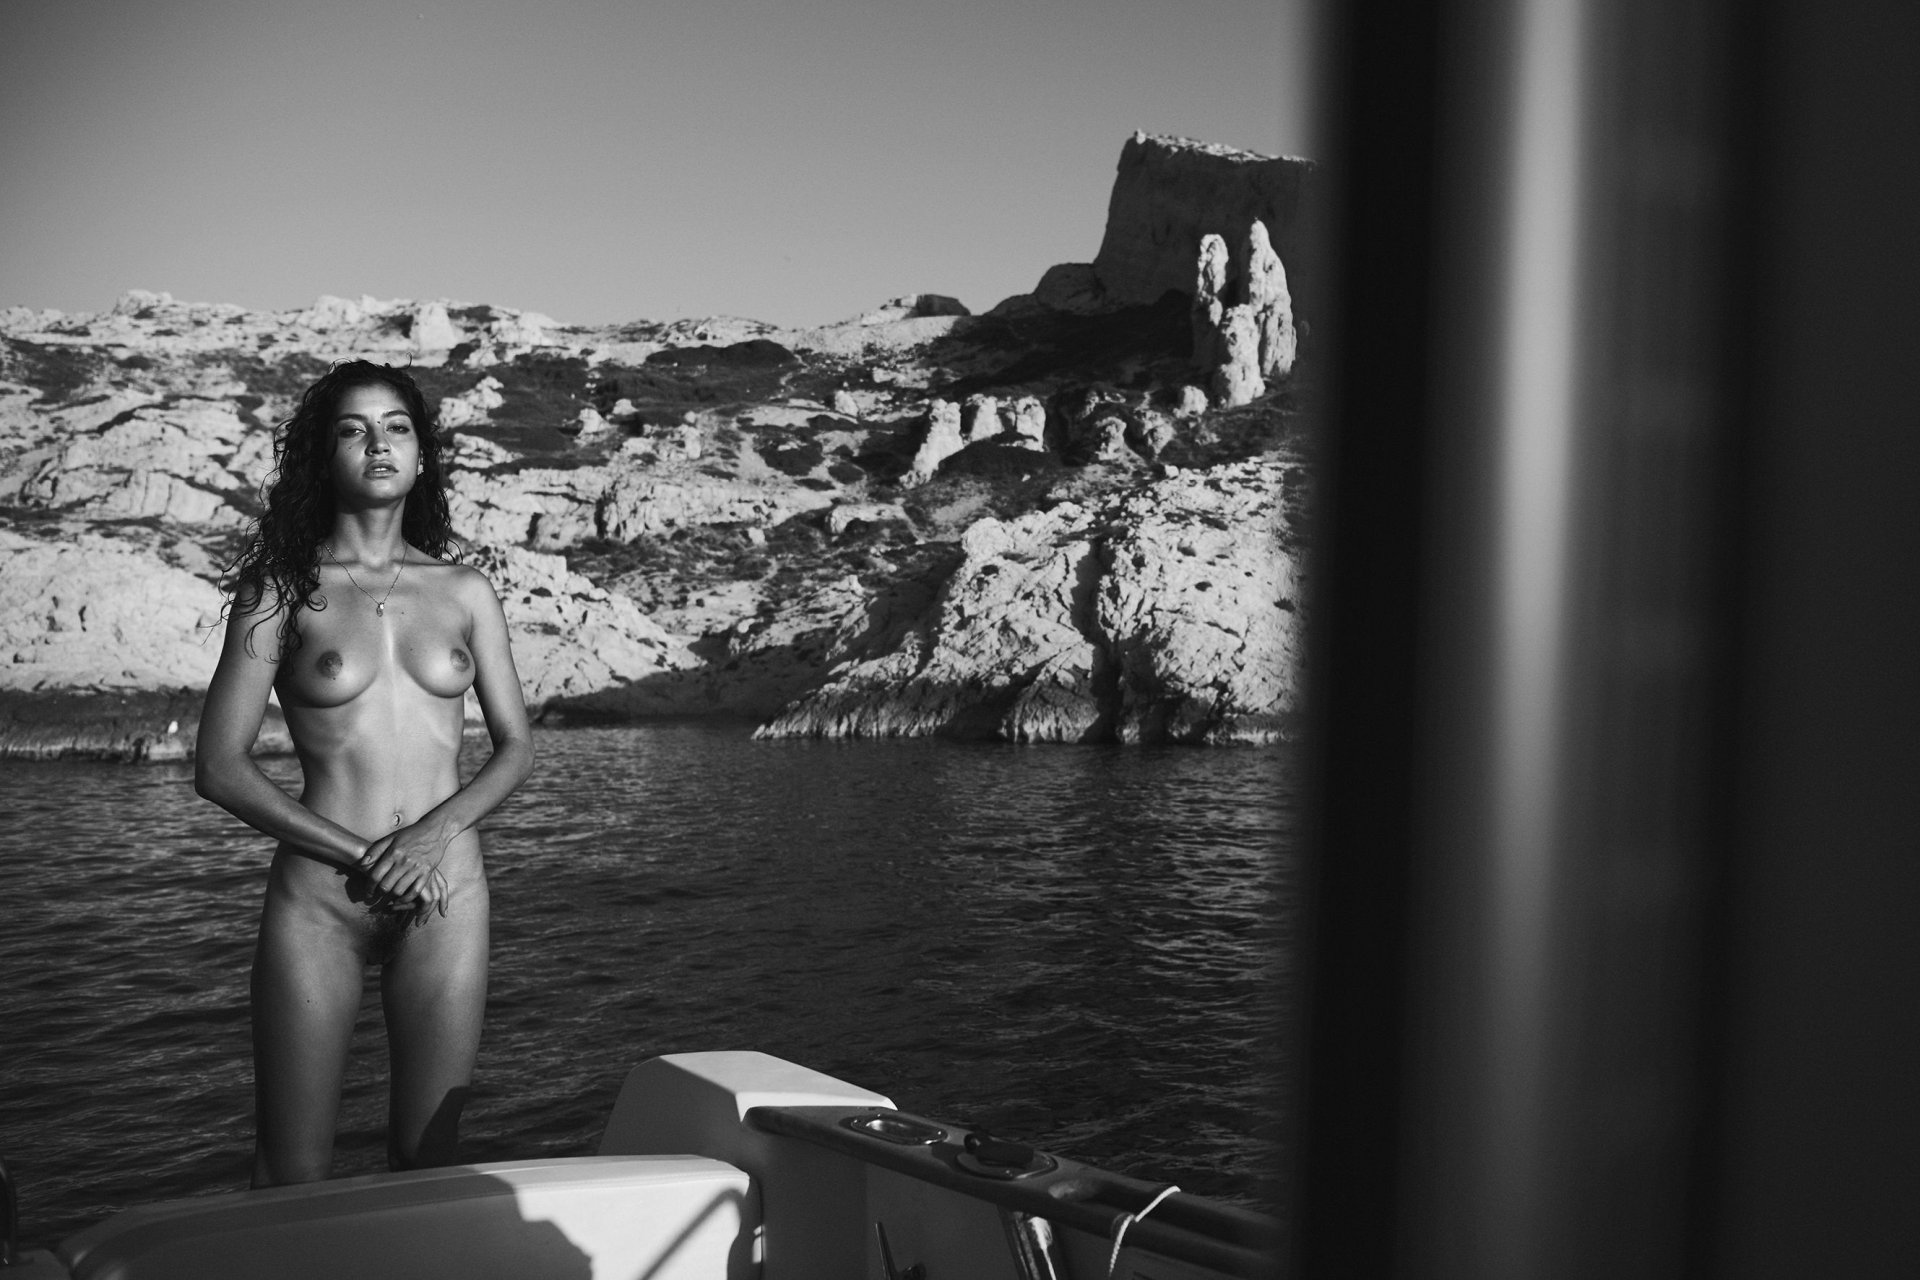 Check out the nude HQ of Emilie Payet by Stefan Rappo. 